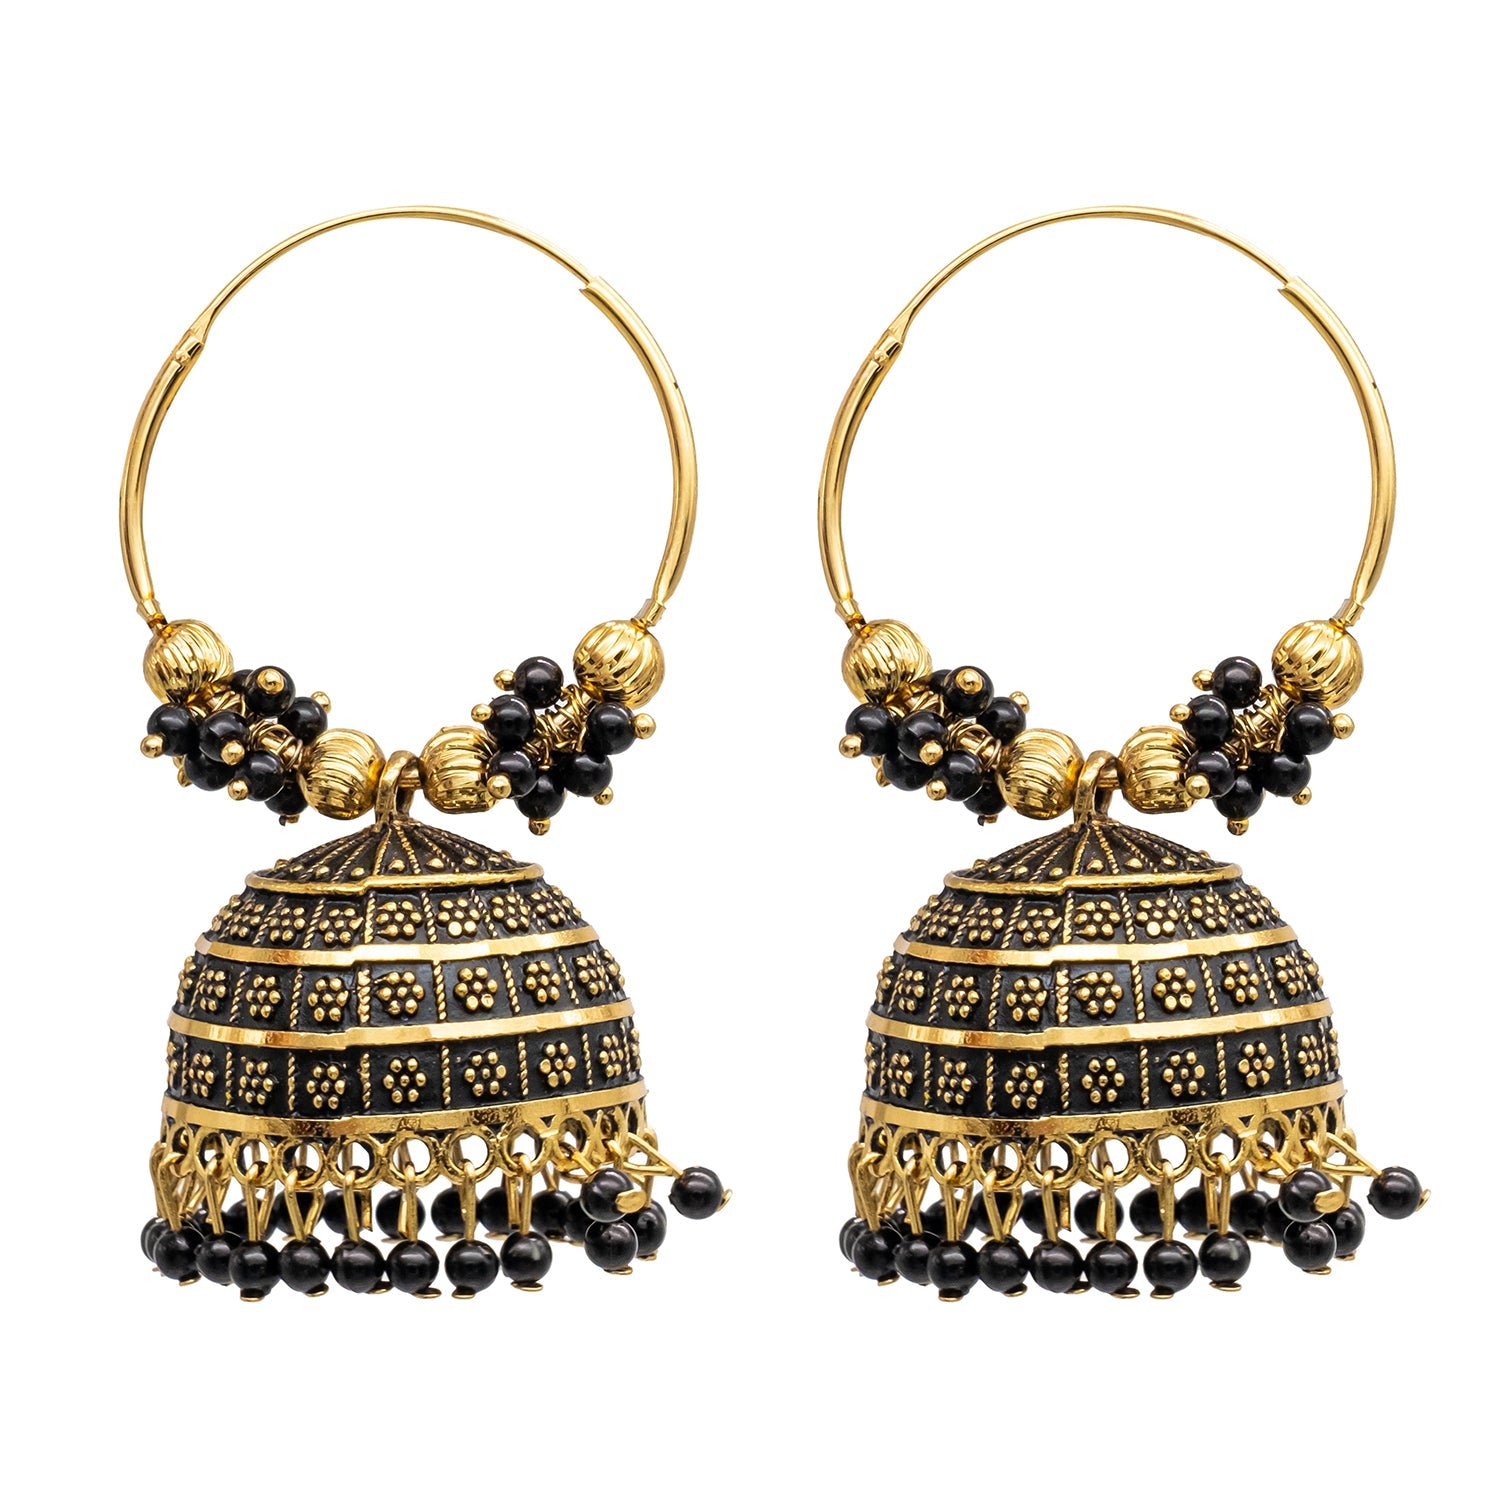 Gold-plated Ethnic Indian earrings with Jhumki design and CZ crystals. |  Pearlings Designer Collection